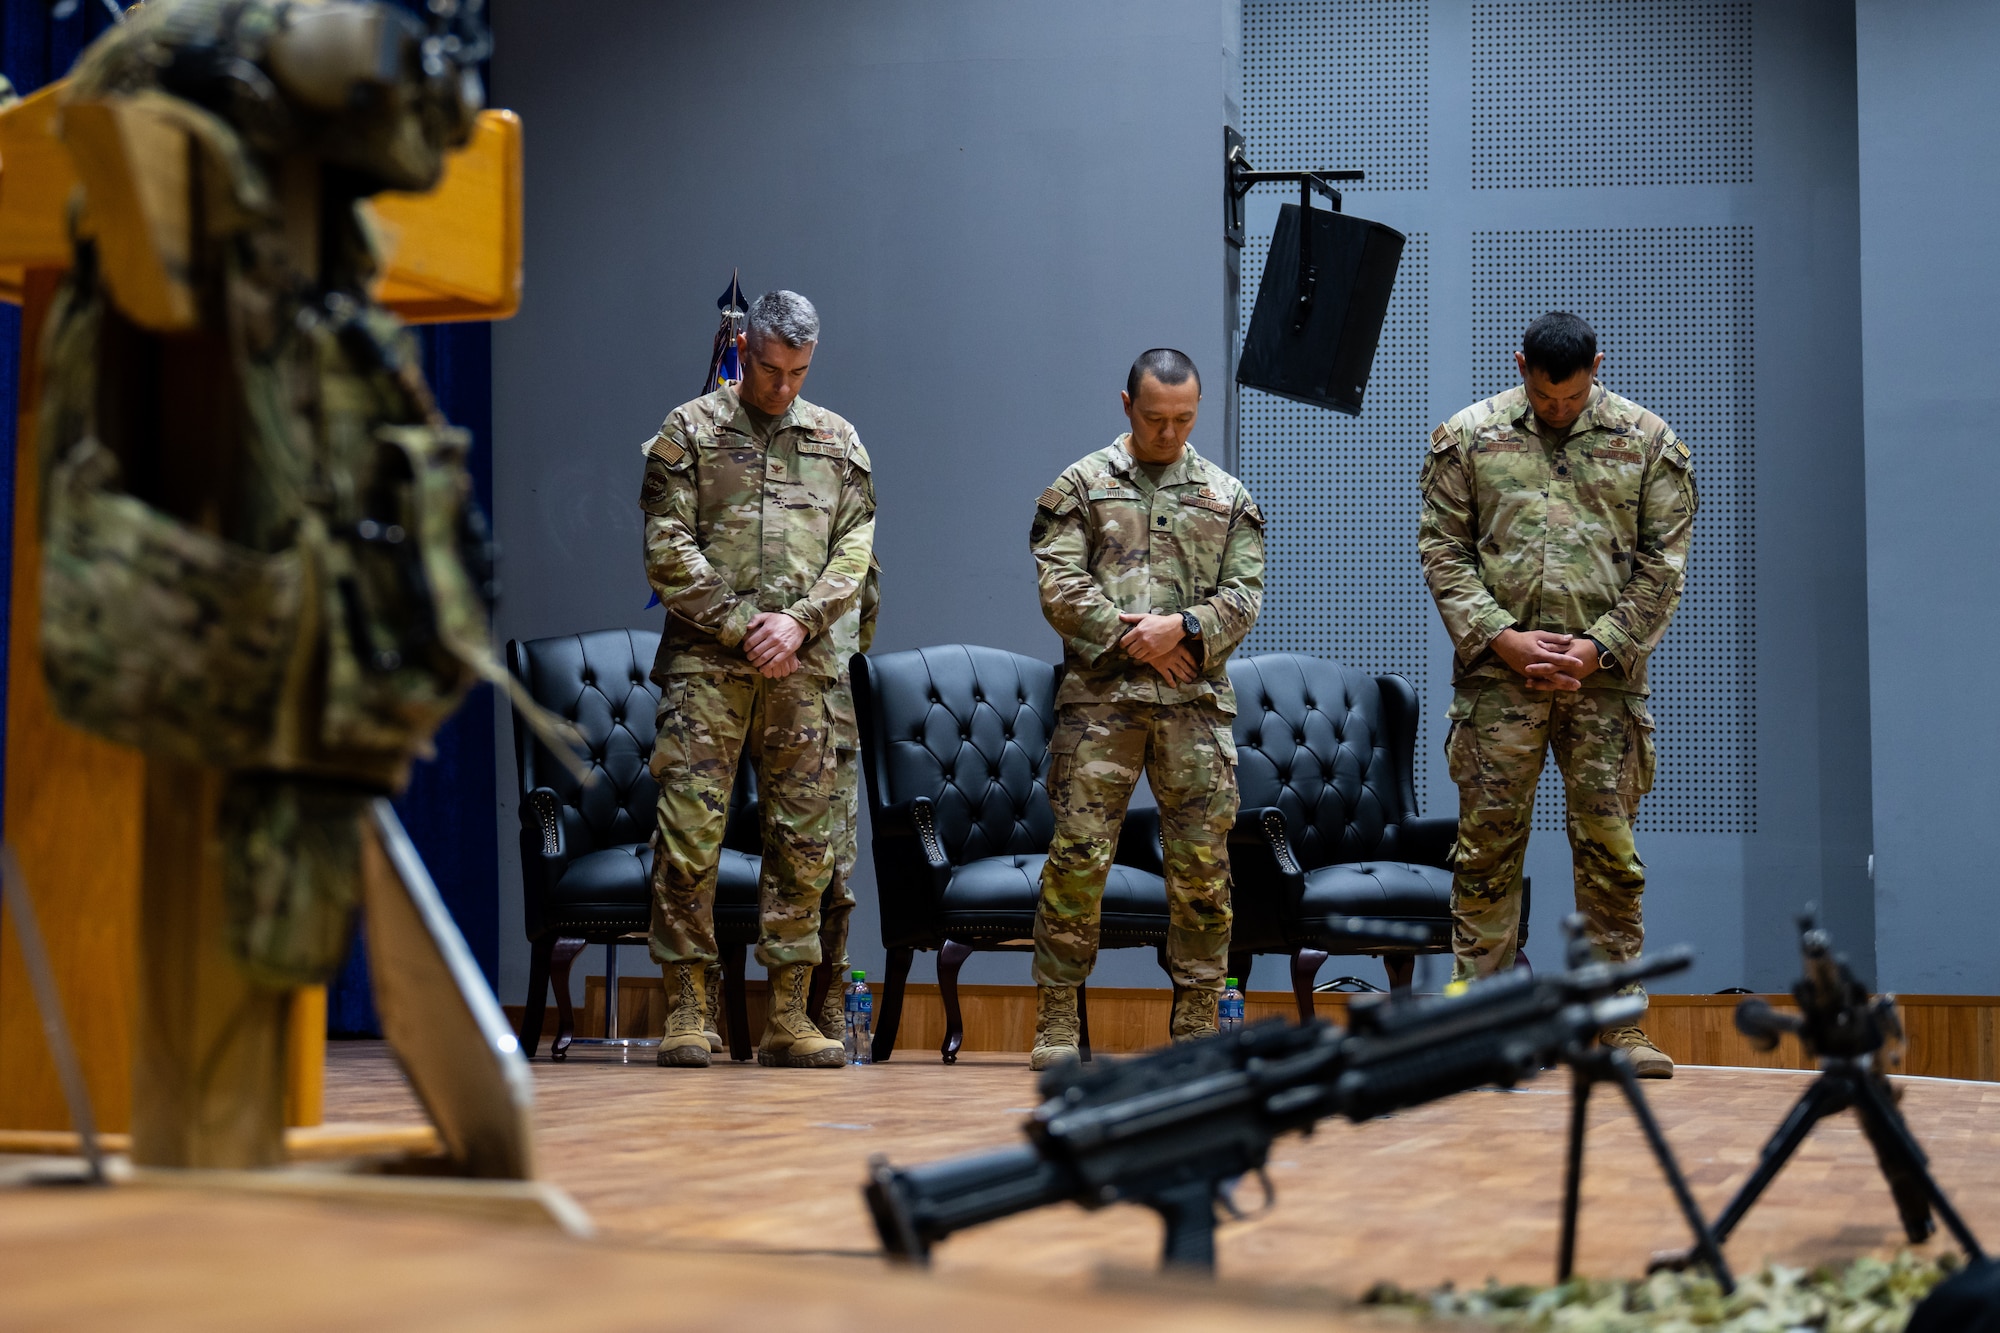 From left, U.S. Air Force Col. George Buch, Jr., 386th Air Expeditionary Wing commander, Lt. Col. Tito Ruiz, outgoing 386th Security Forces Squadron commander, and Lt. Col. Michael E. Wetlesen, incoming 386th ESFS commander, bow their heads during an invocation at a change of command ceremony at Ali Al Salem Air Base, Kuwait, June 23, 2023. Ruiz is relinquishing command to Wetlesen. (U.S. Air Force photo by Staff Sgt. Kevin Long)